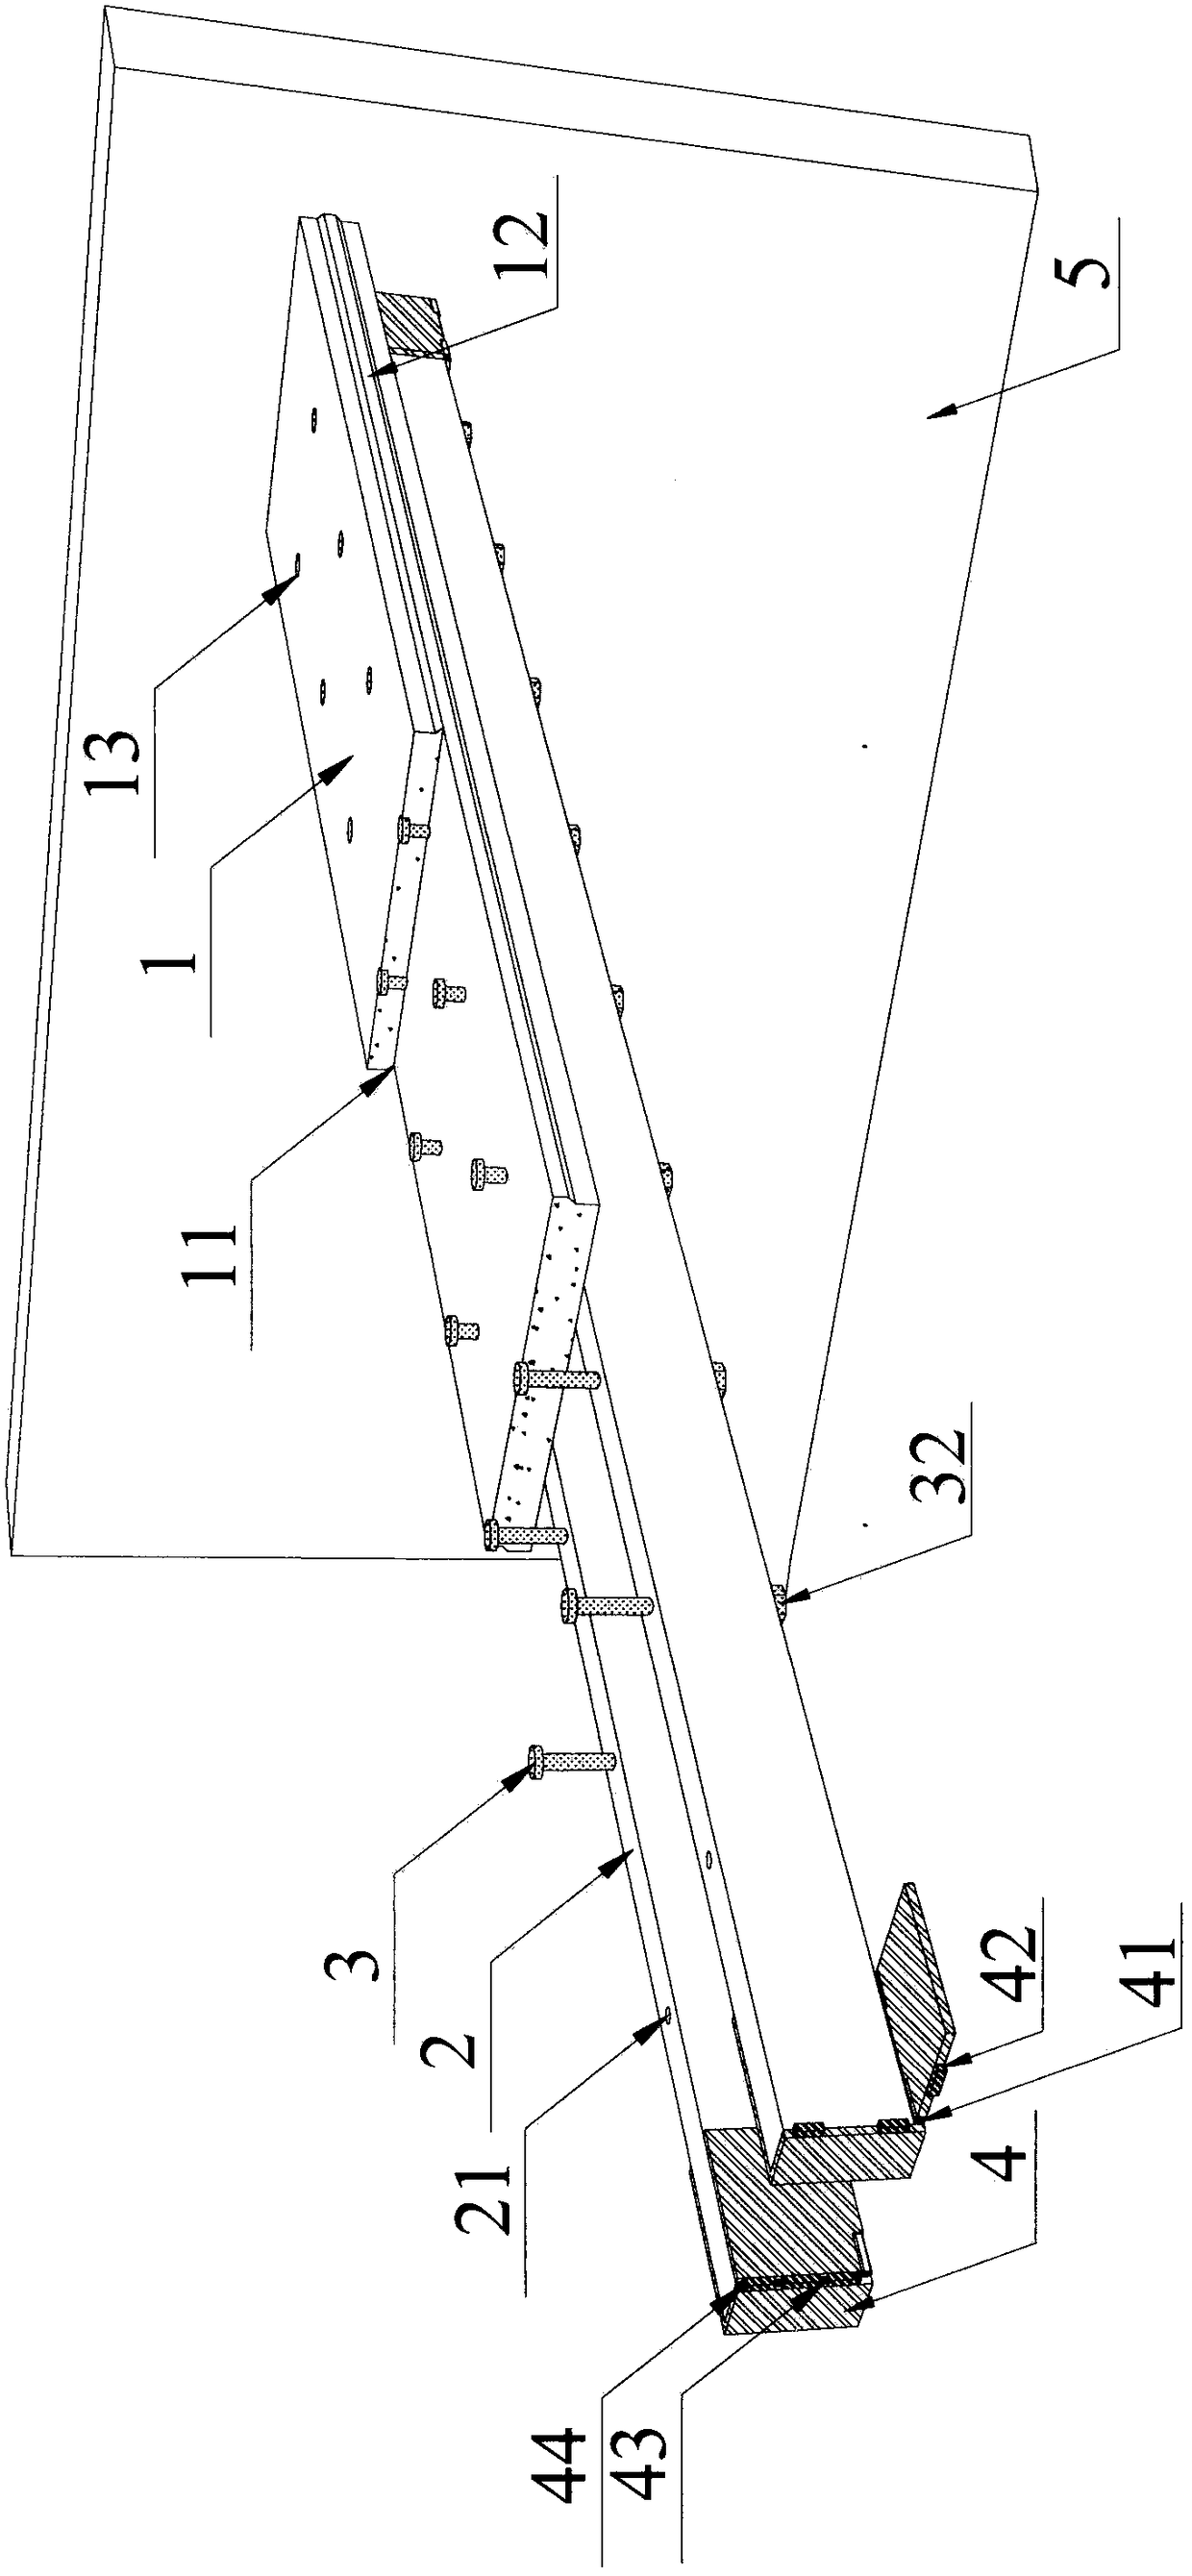 Ribbed aerated concrete tongue-and-groove floor system and assembly method thereof